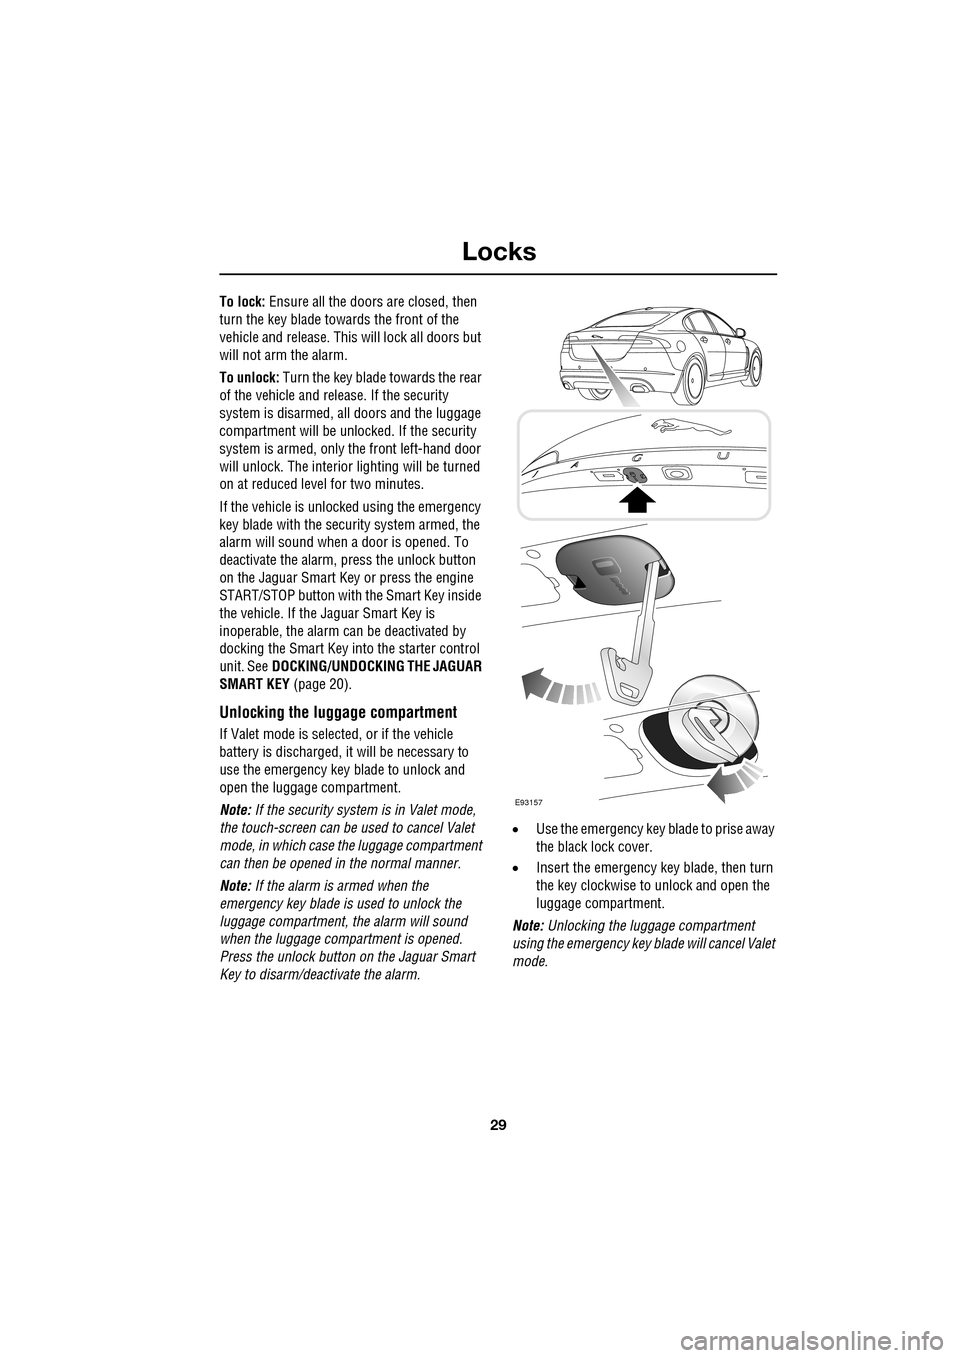 JAGUAR XF 2009 1.G User Guide 29
Locks
               
To lock: Ensure all the doors are closed, then 
turn the key blade towards the front of the 
vehicle and release. Thi s will lock all doors but 
will not arm the alarm.
To unl